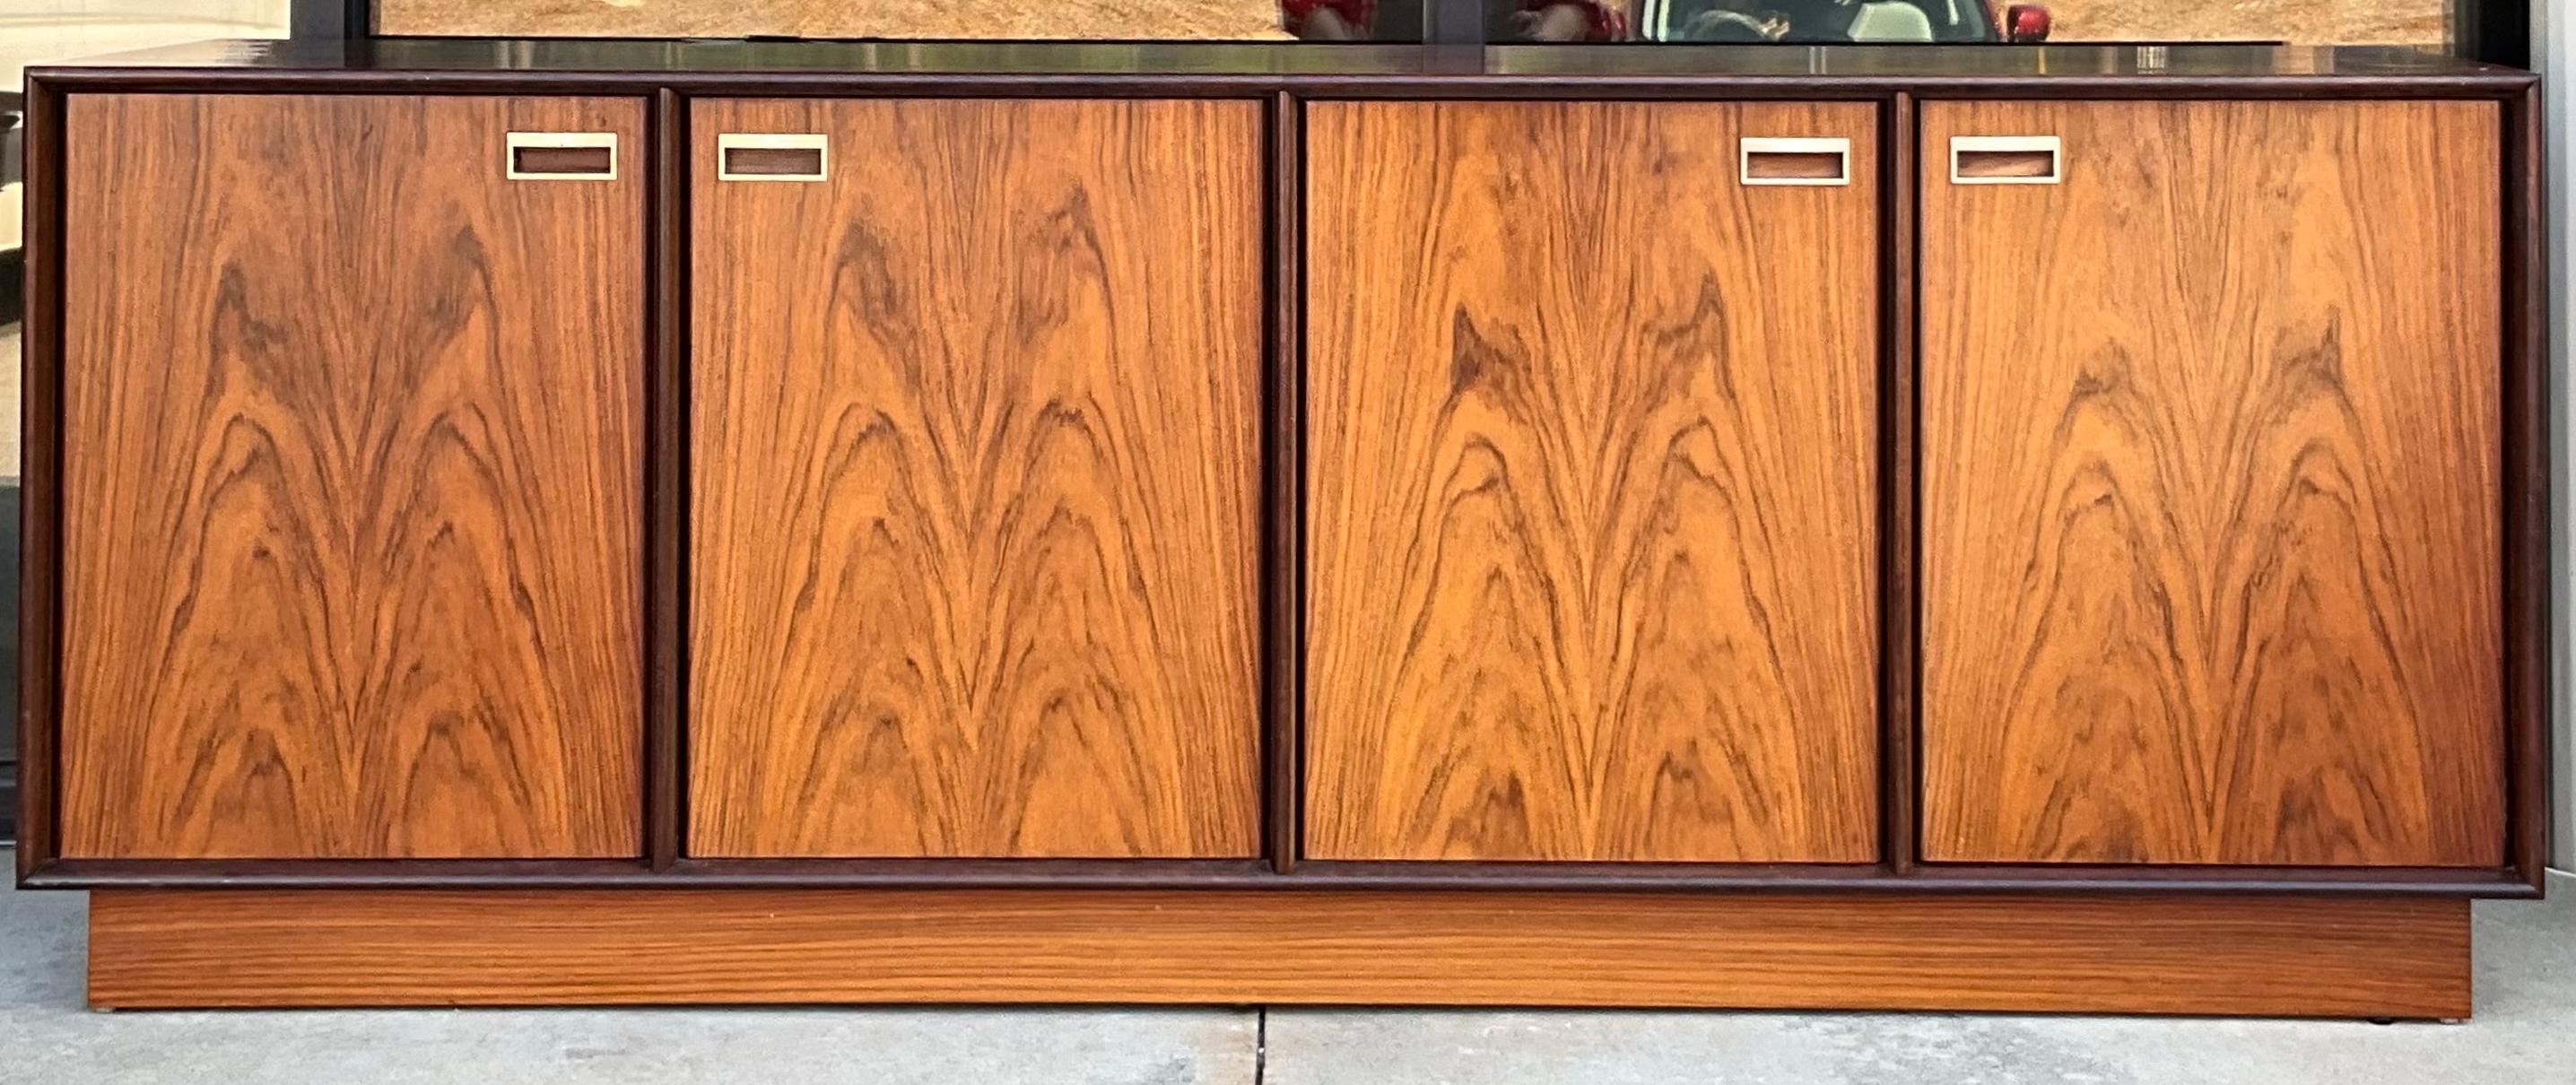 This is a versatile piece! From dining to media, it could work any where! This is a midcentury Danish modern credenza. It is a rosewood veneer with brass hardware. It is in very good condition, and the interior provides a substantial amount of